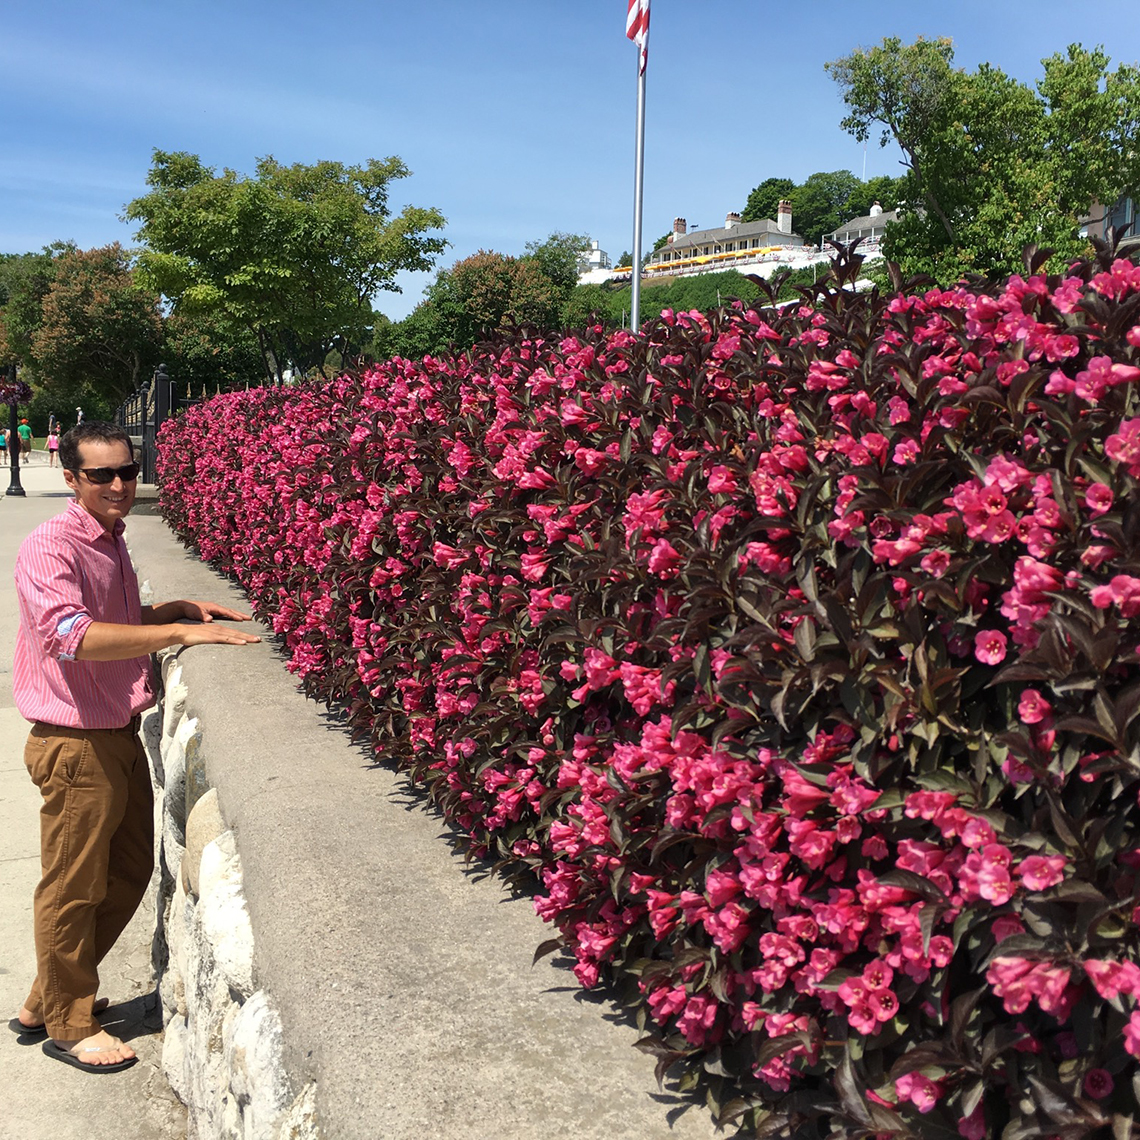 A man in a pink shirt stands in front of a neatly trimmed hedge of Wine & Roses weigela in full bloom